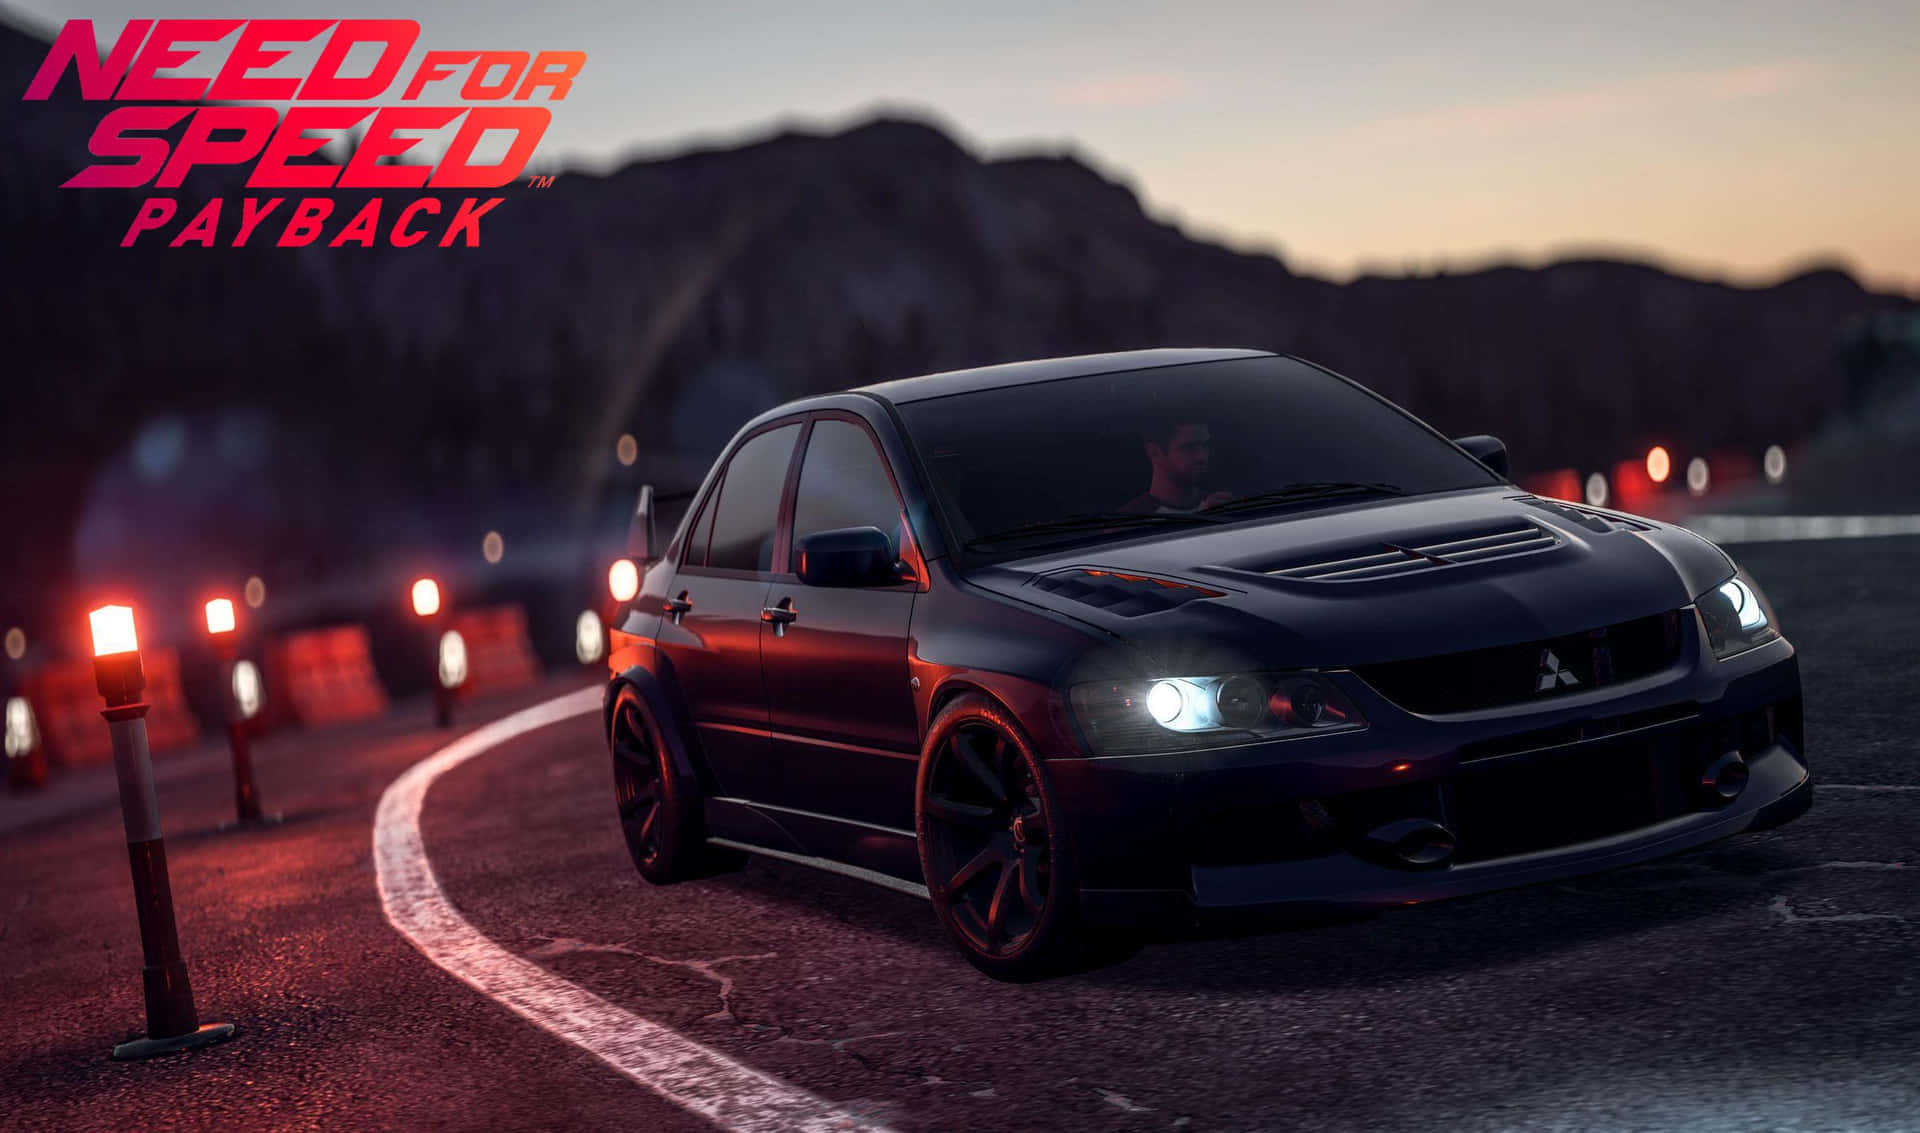 An intense Need For Speed Payback nighttime race